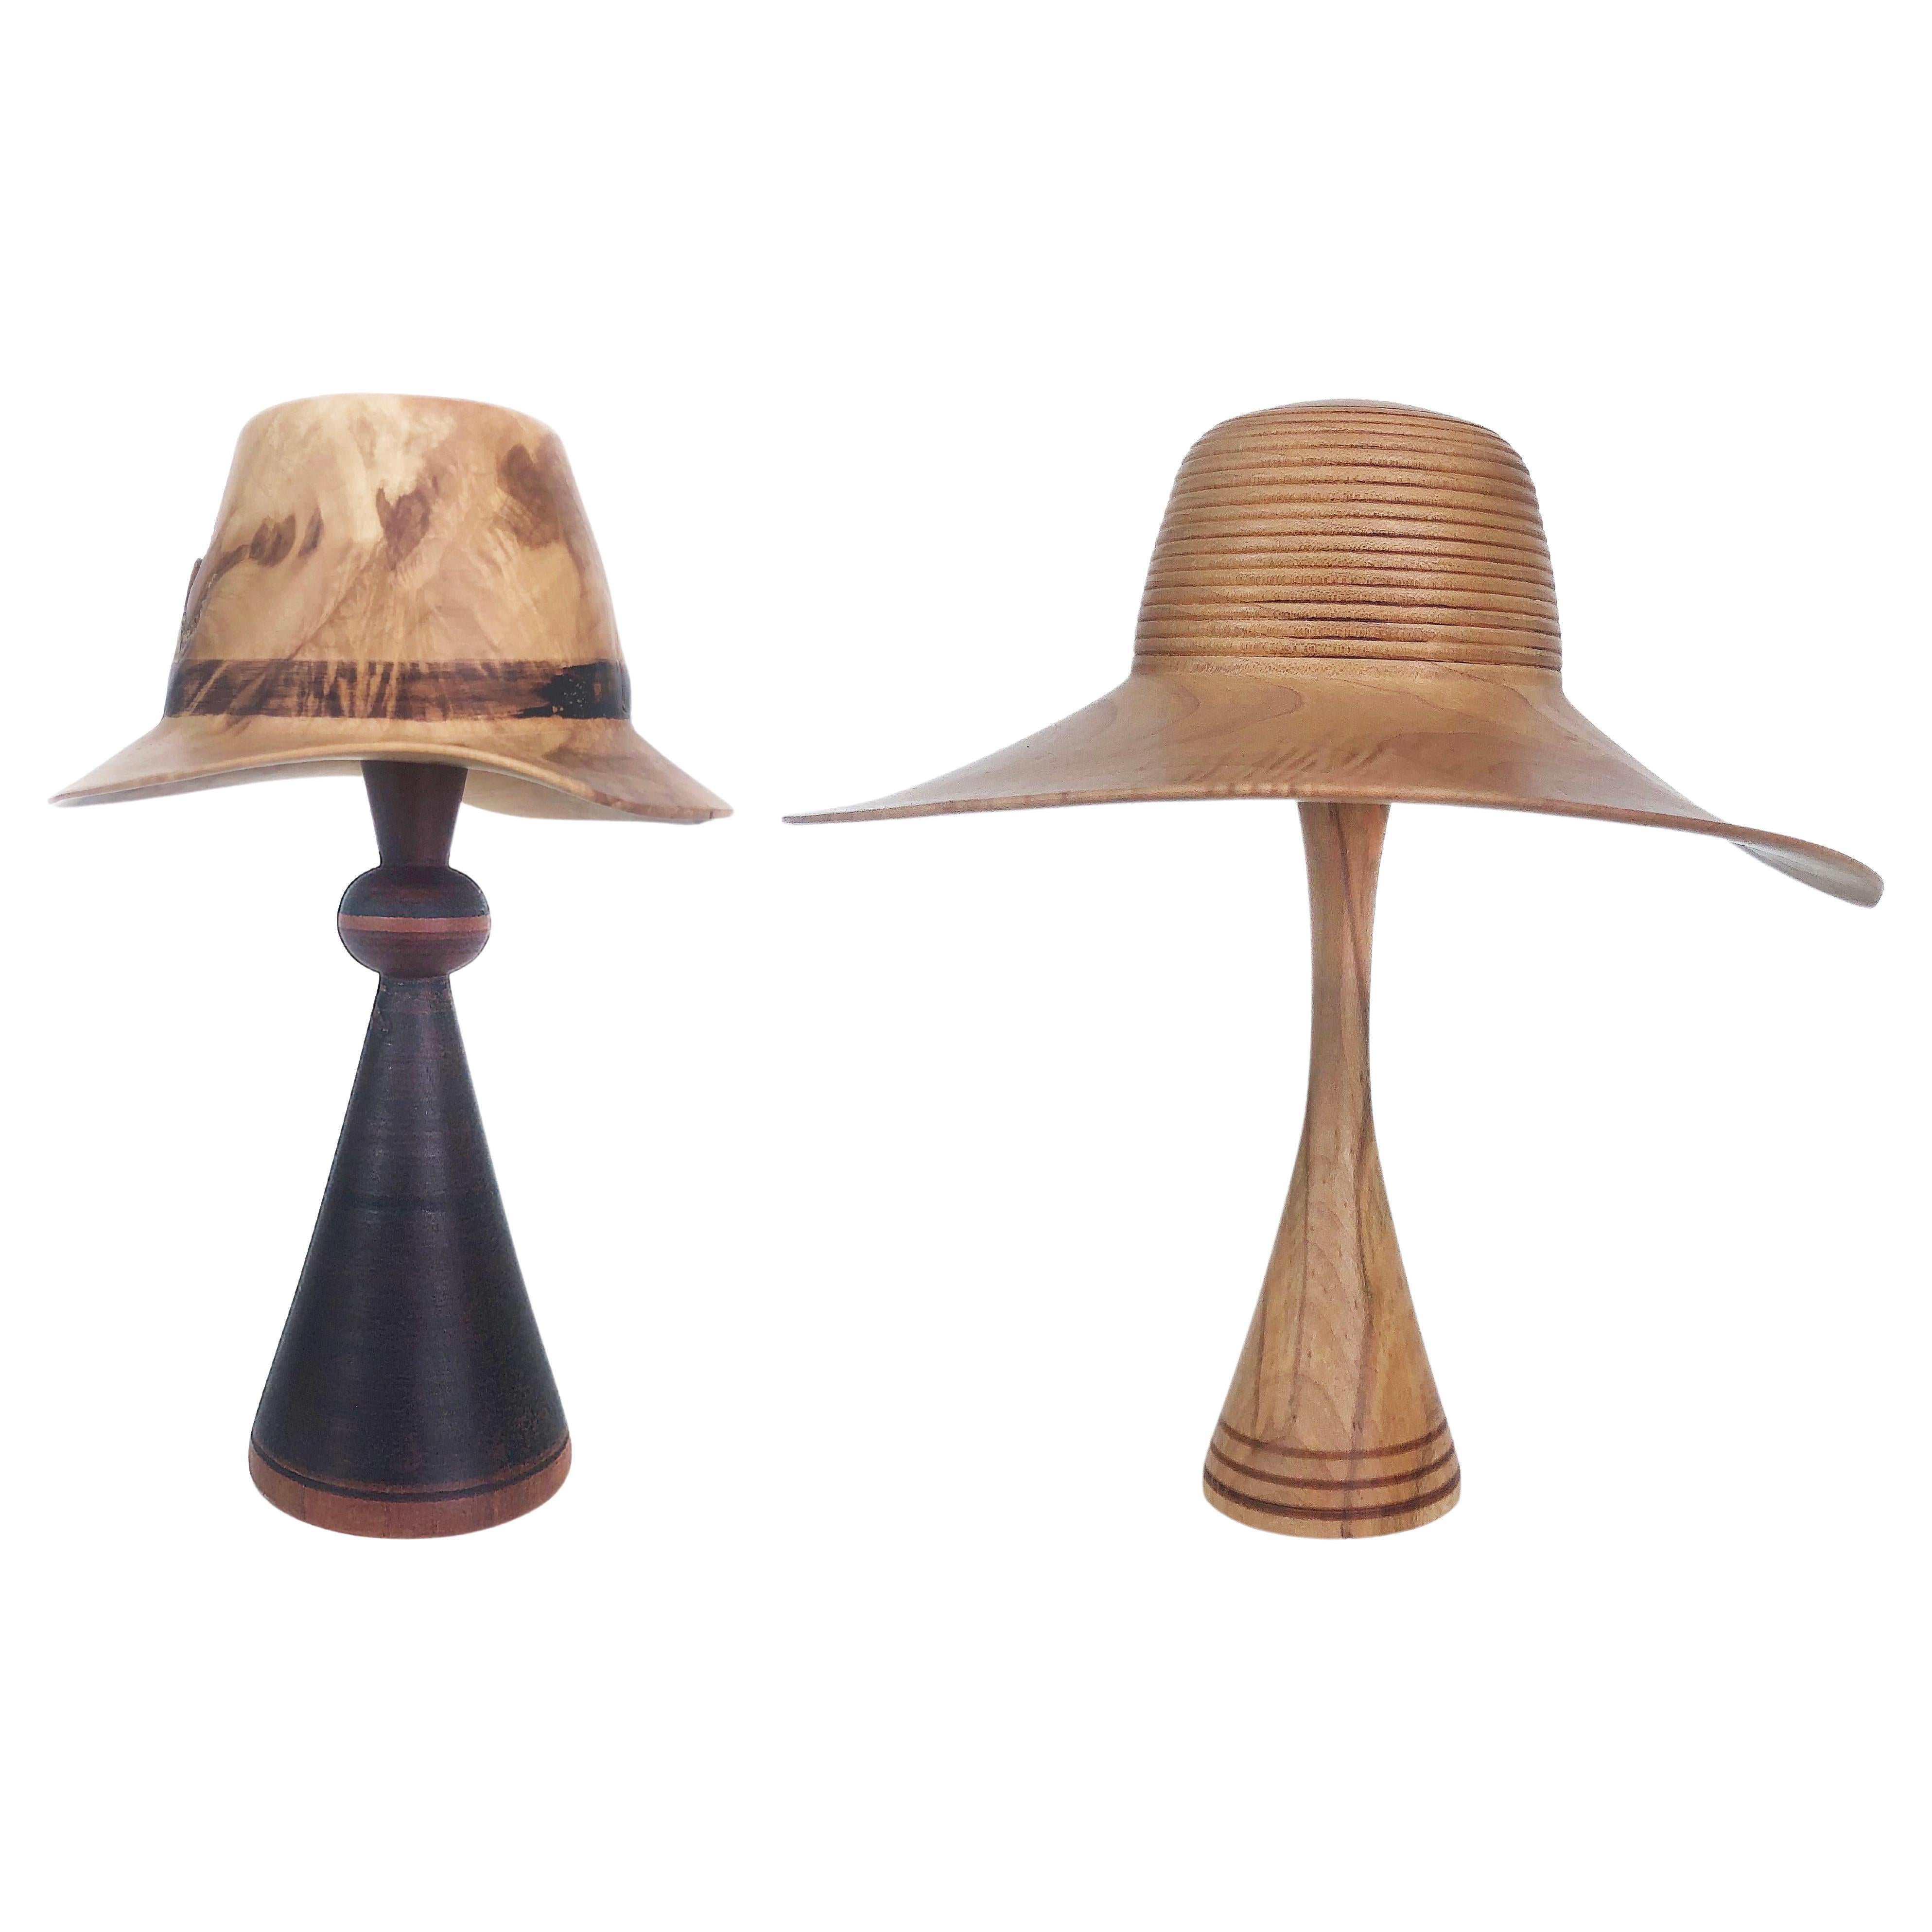  Johannes Michelsen Turned Pair of Wood Hats on Stands, Signed and Dated